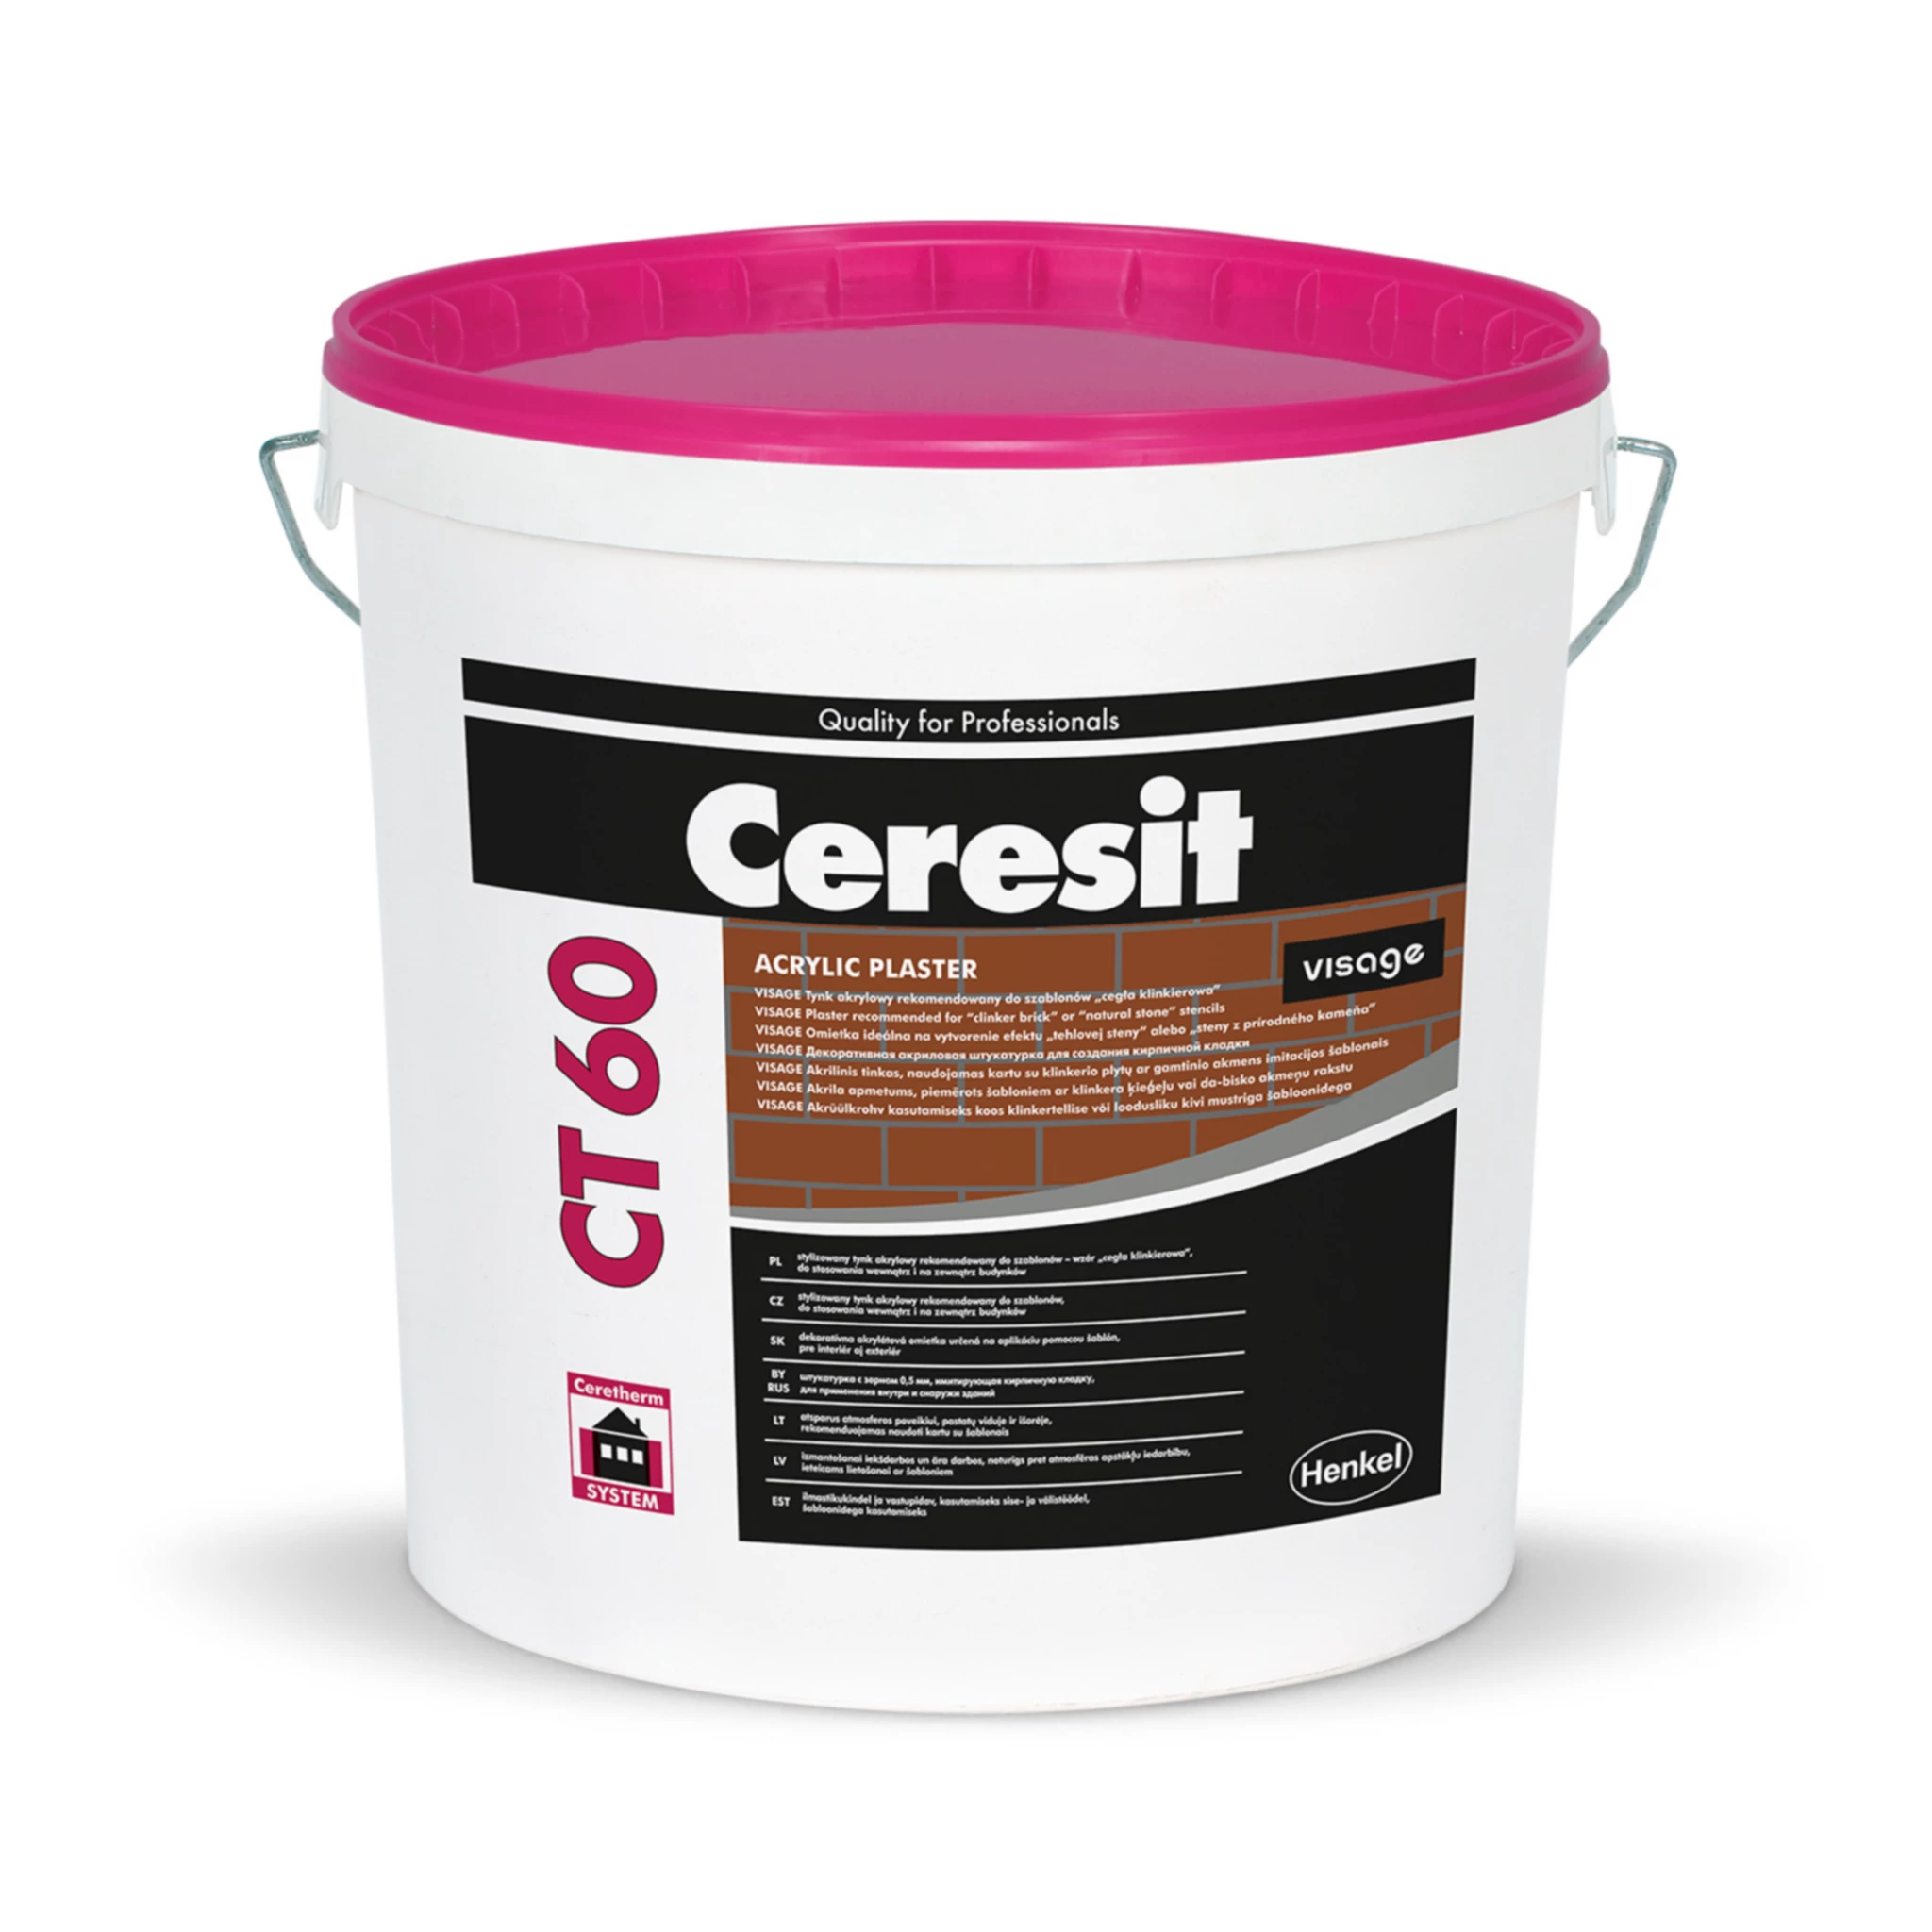 Ceresit CT60 Visage.Decorative acrylic plaster, structure like stone with 0.5mm